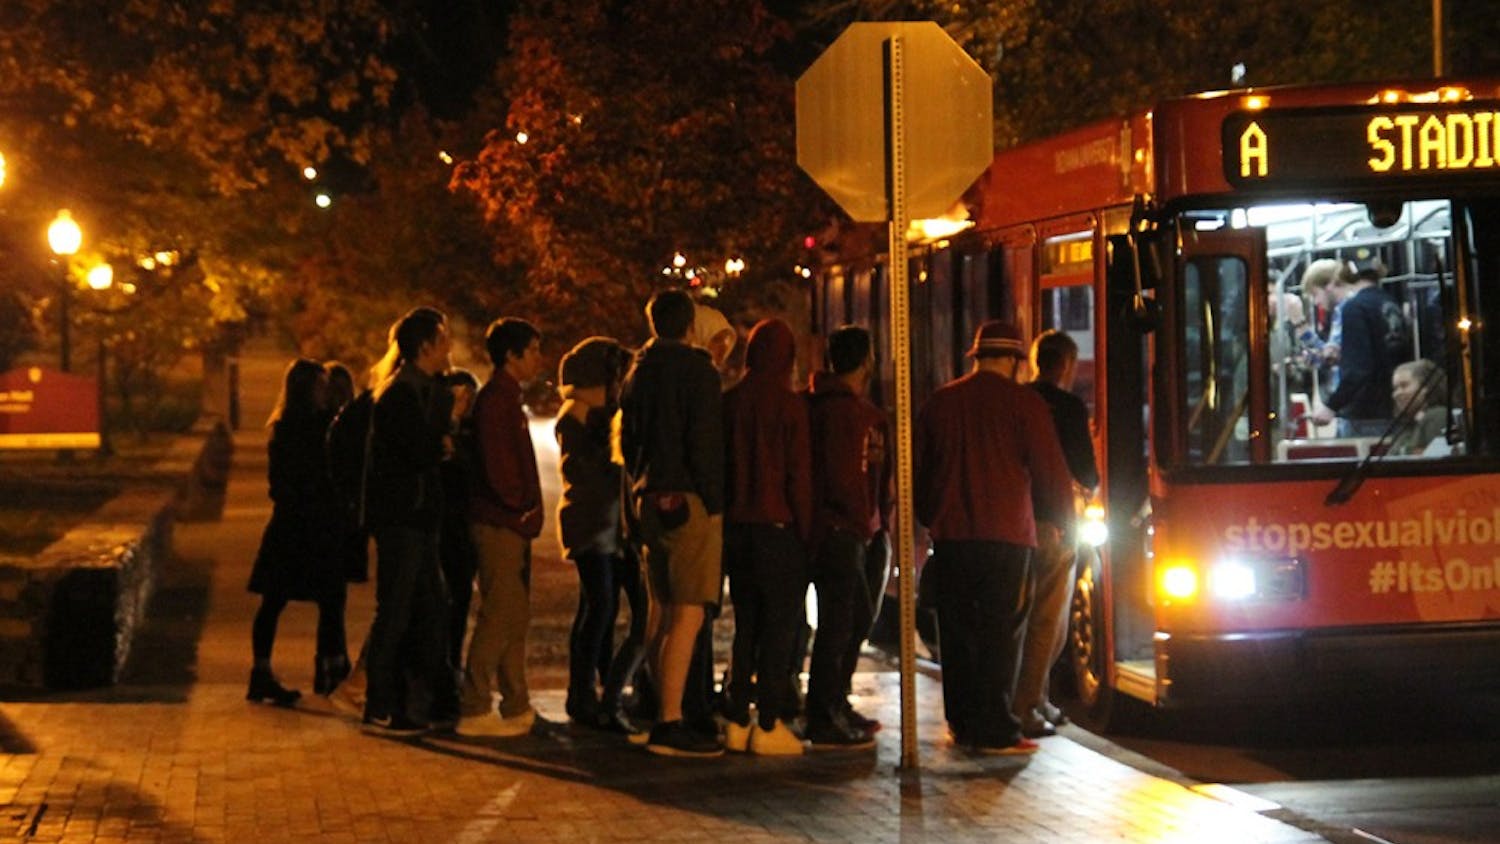 Students catching the bus home as winter sets in on Nov. 12, 2016 in Bloomington, Ind. Despite there being a football game earlier, the cold deterred the amount of partying that typically takes place.